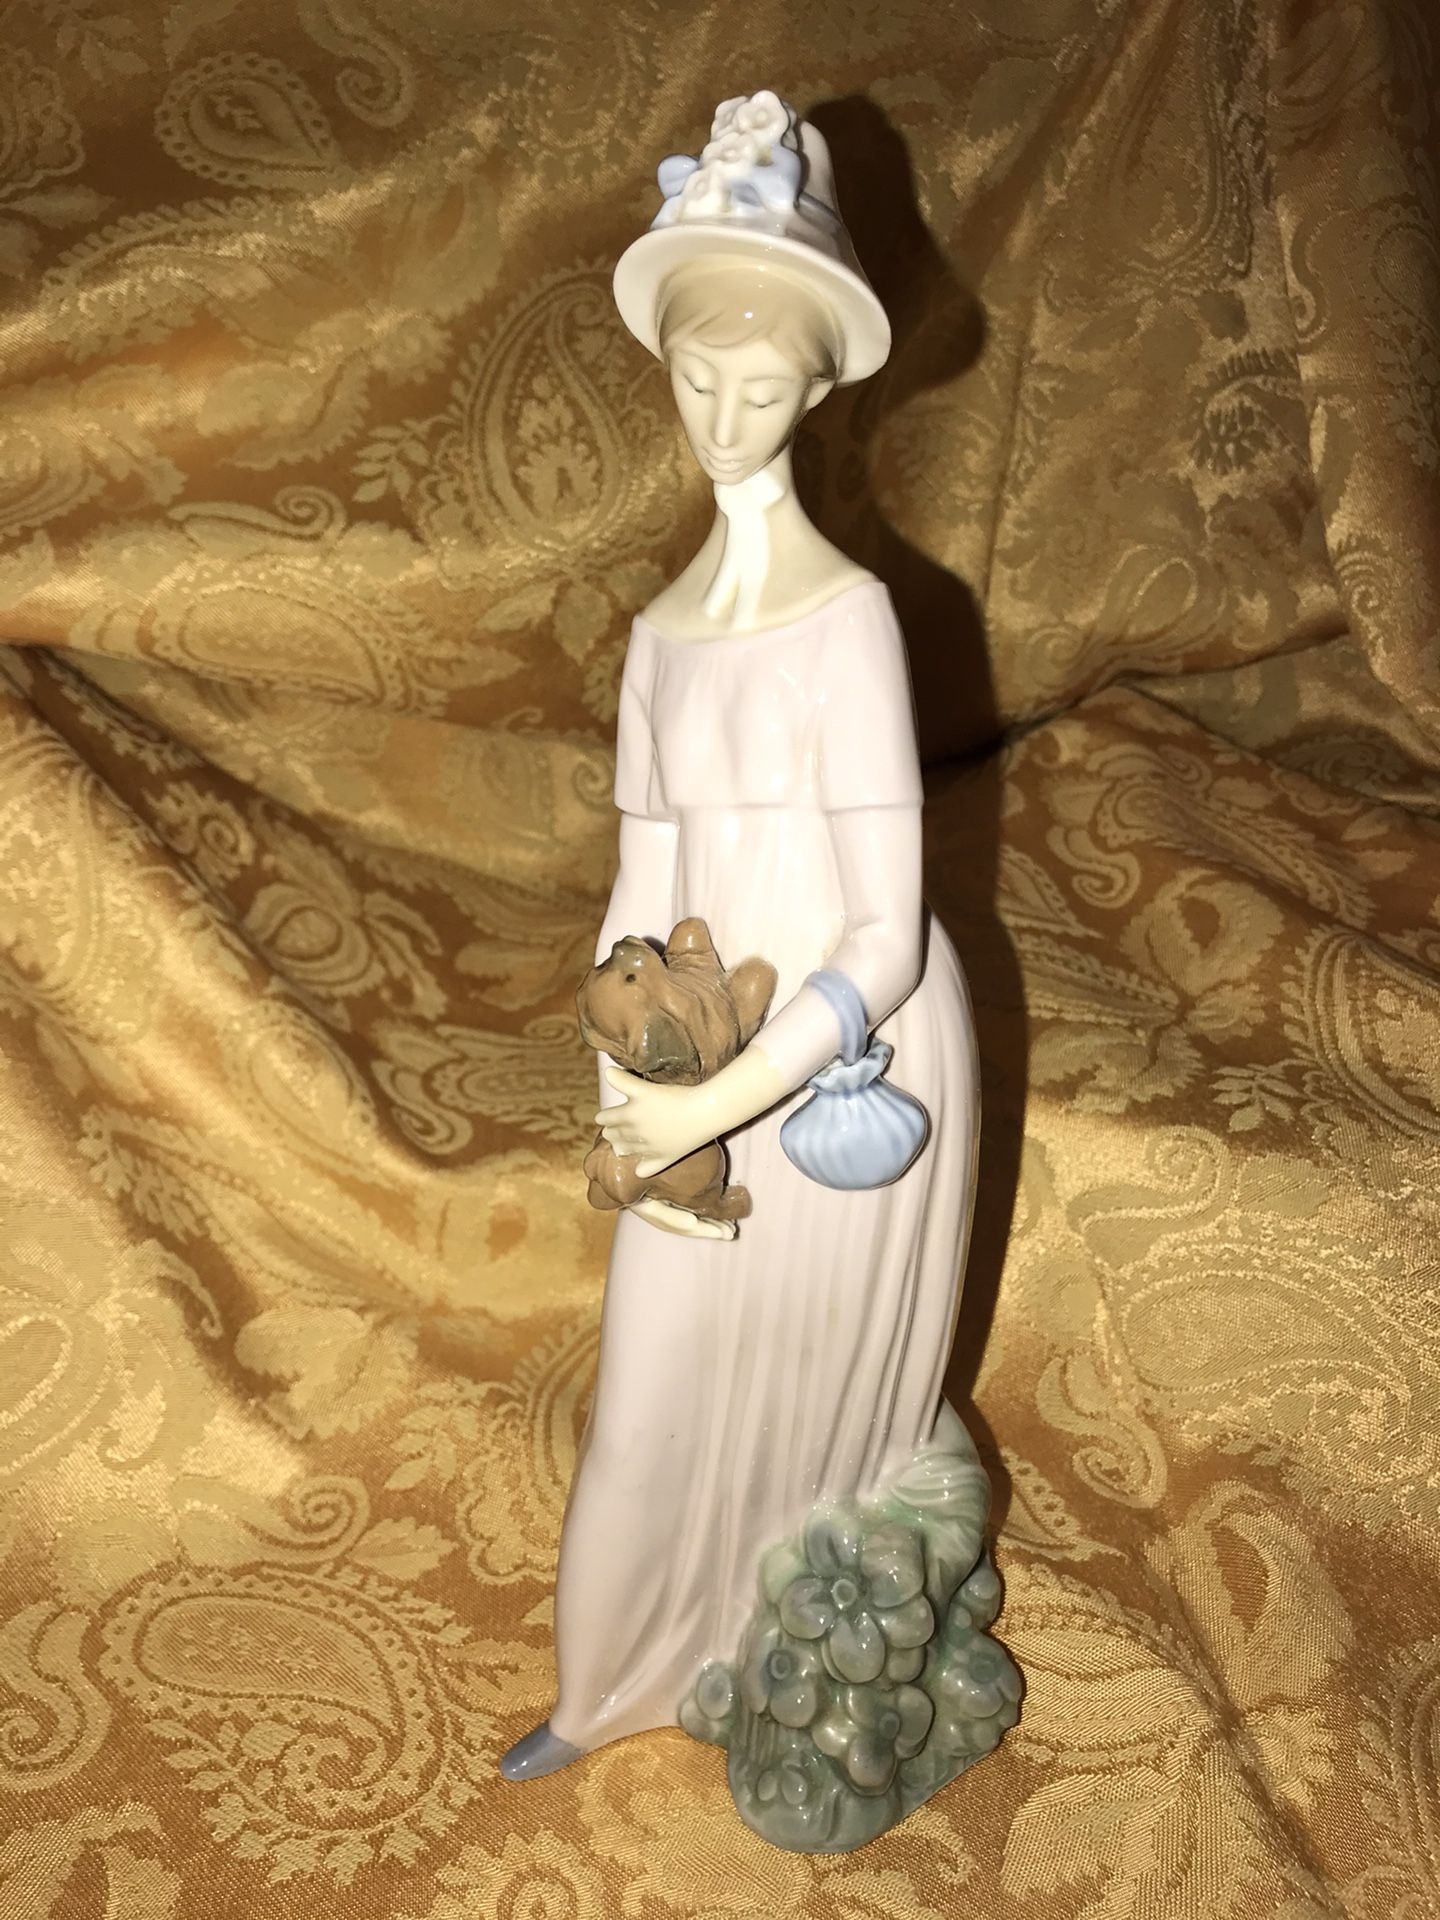 Lladro 4994 Looking at Her Dog/My Little Pet porcelain figurine. Retired.